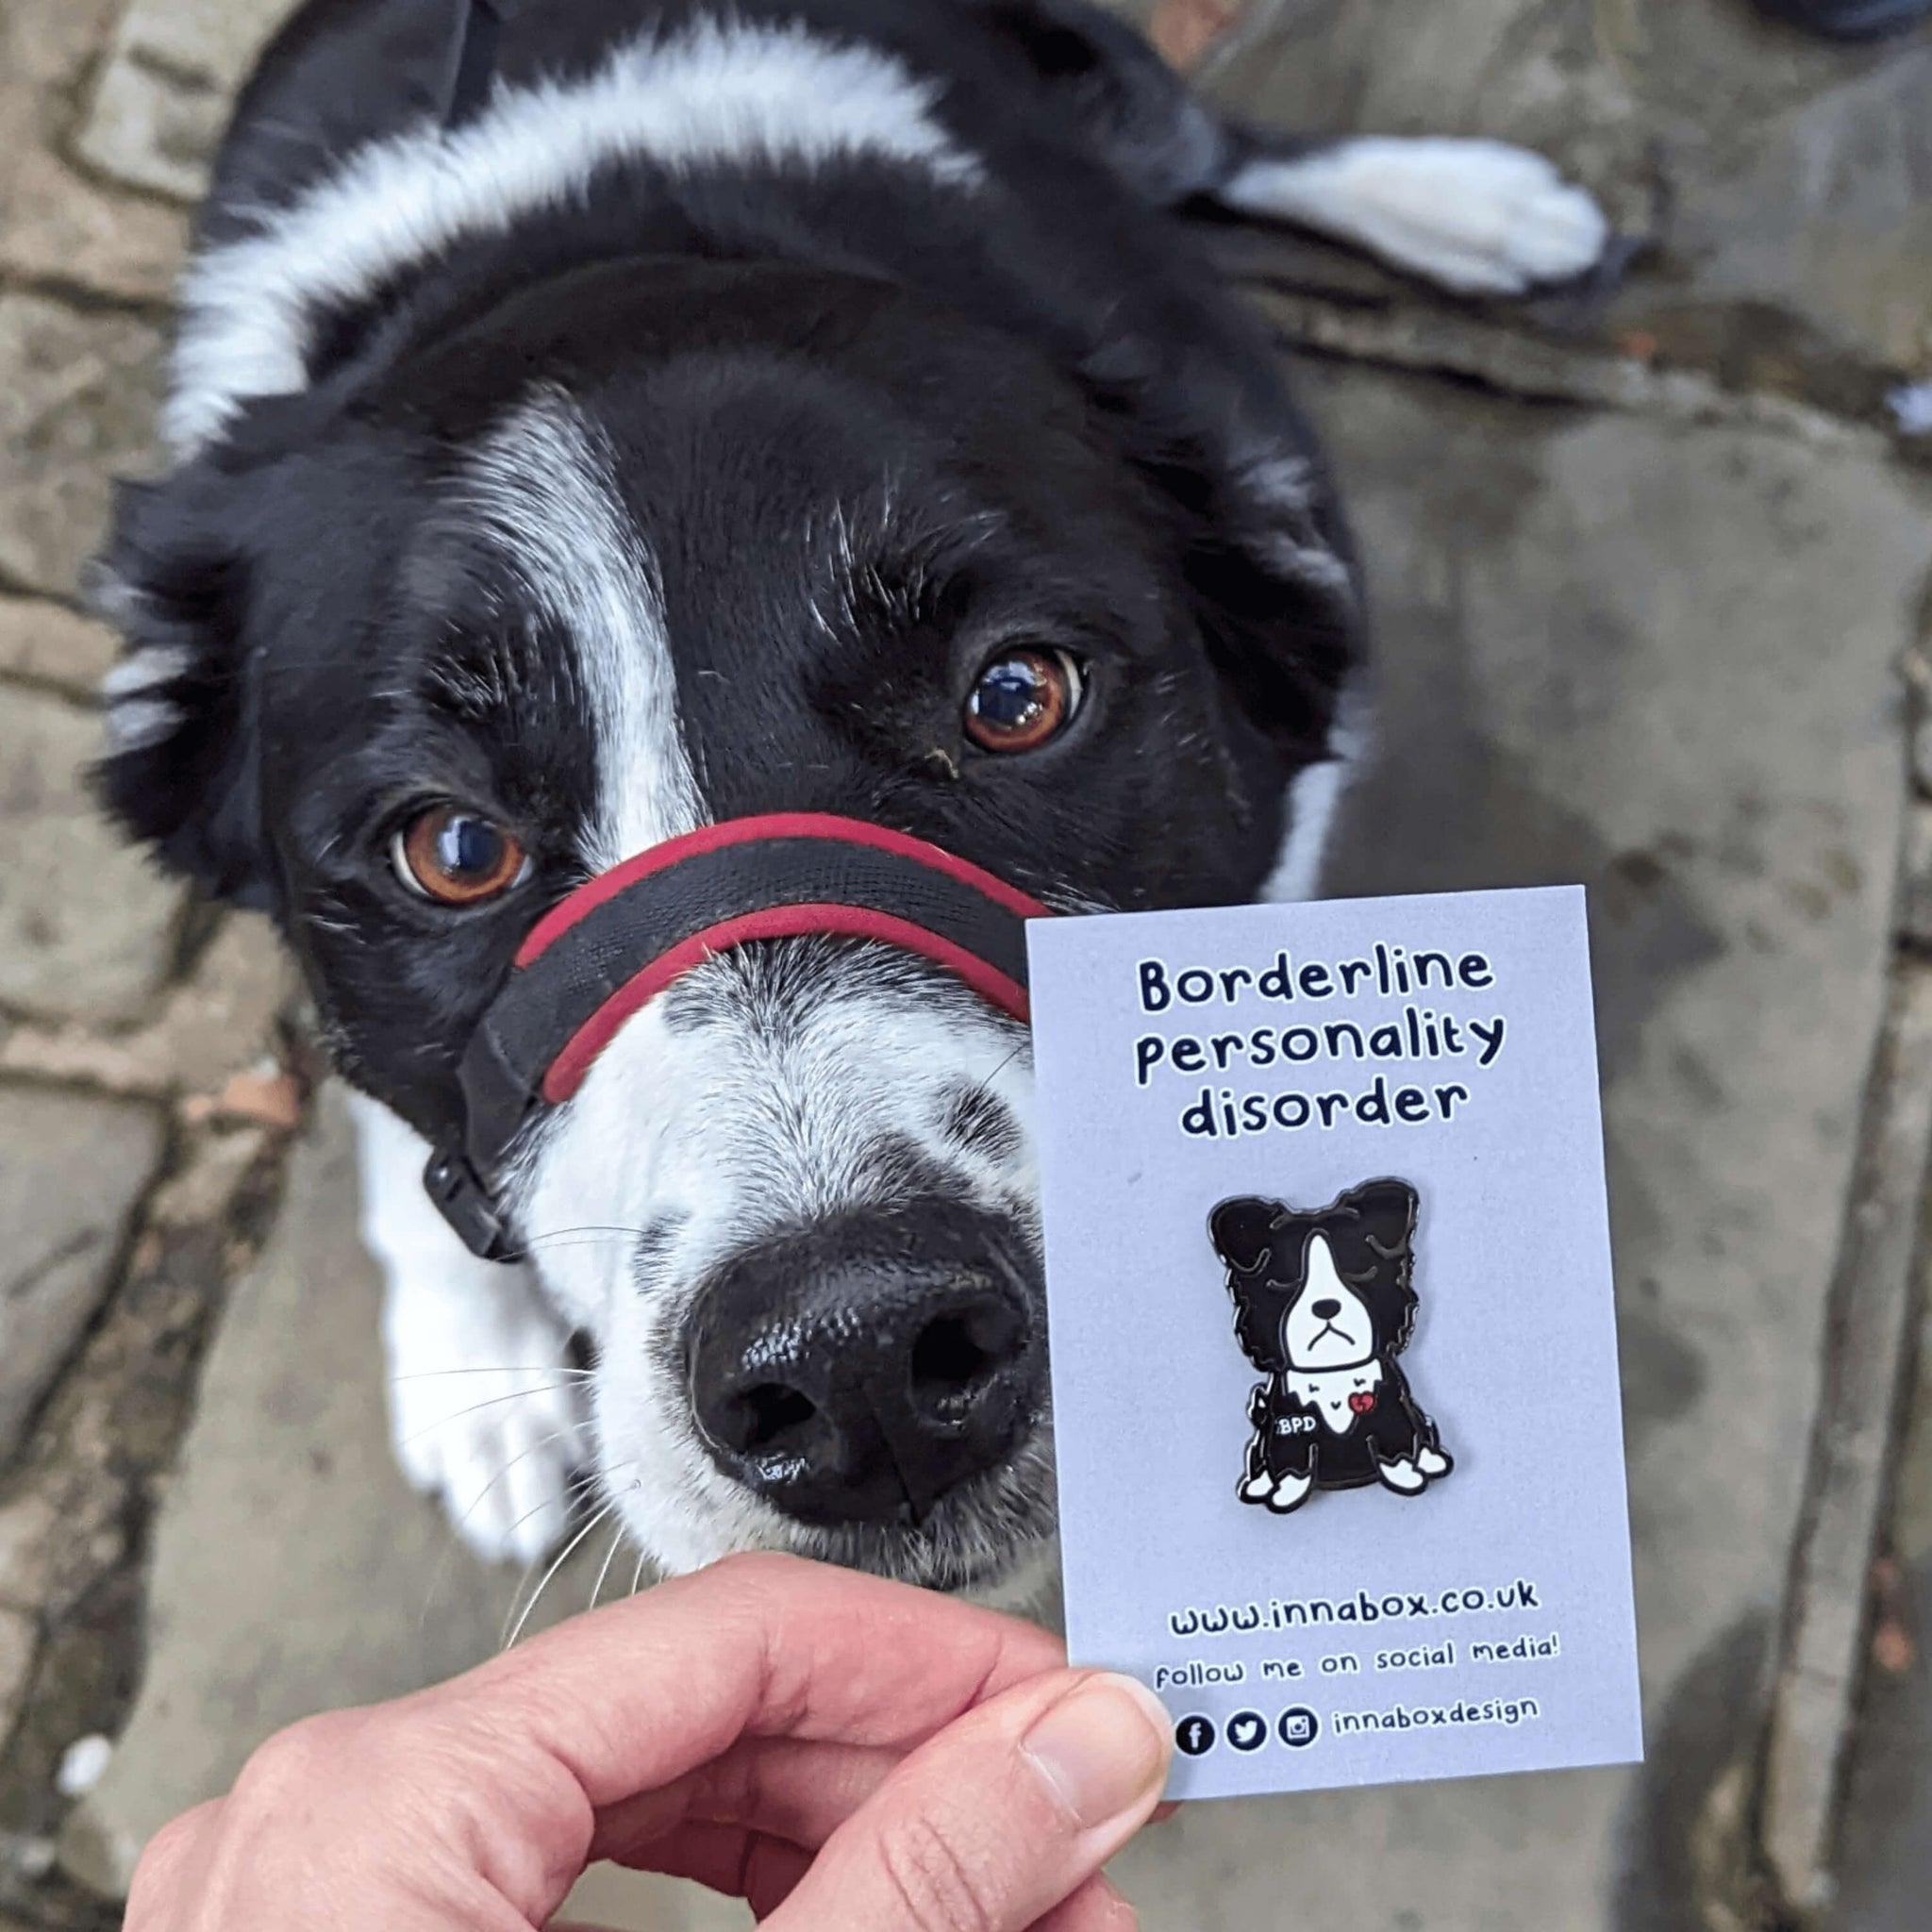 BPD Enamel Pin - Borderline Personality Disorder on a white backing card with the product title above and the innabox social media handles underneath, the pin is being held next to a black and white fluffy dog sniffing the pin. The black and white sad dog pin has a broken heart with BPD written across its chest. The pin is designed to raise awareness for Borderline Personality Disorder.